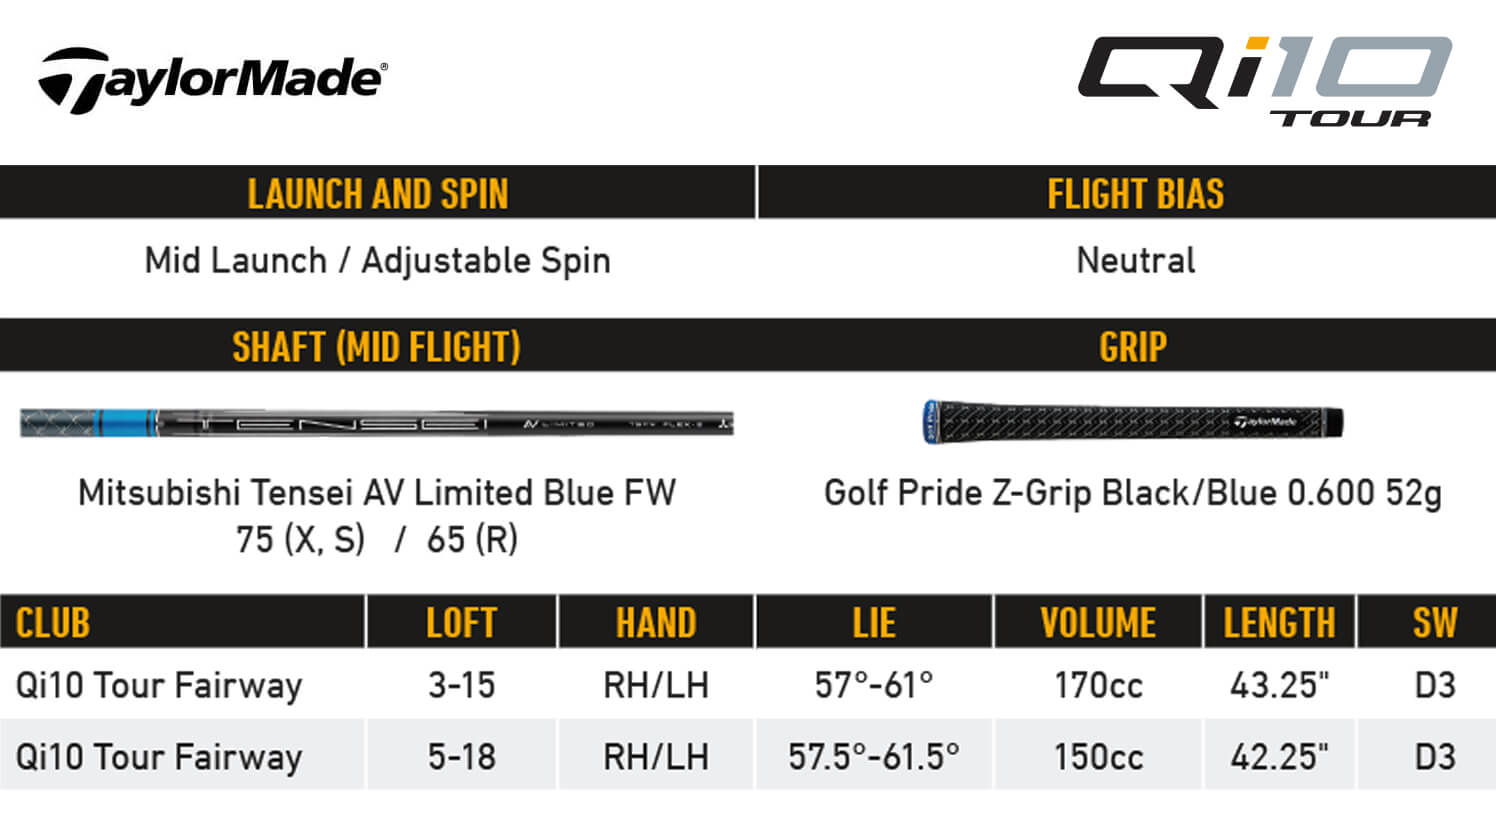 TaylorMade Qi10 Tour Fairway Specifications